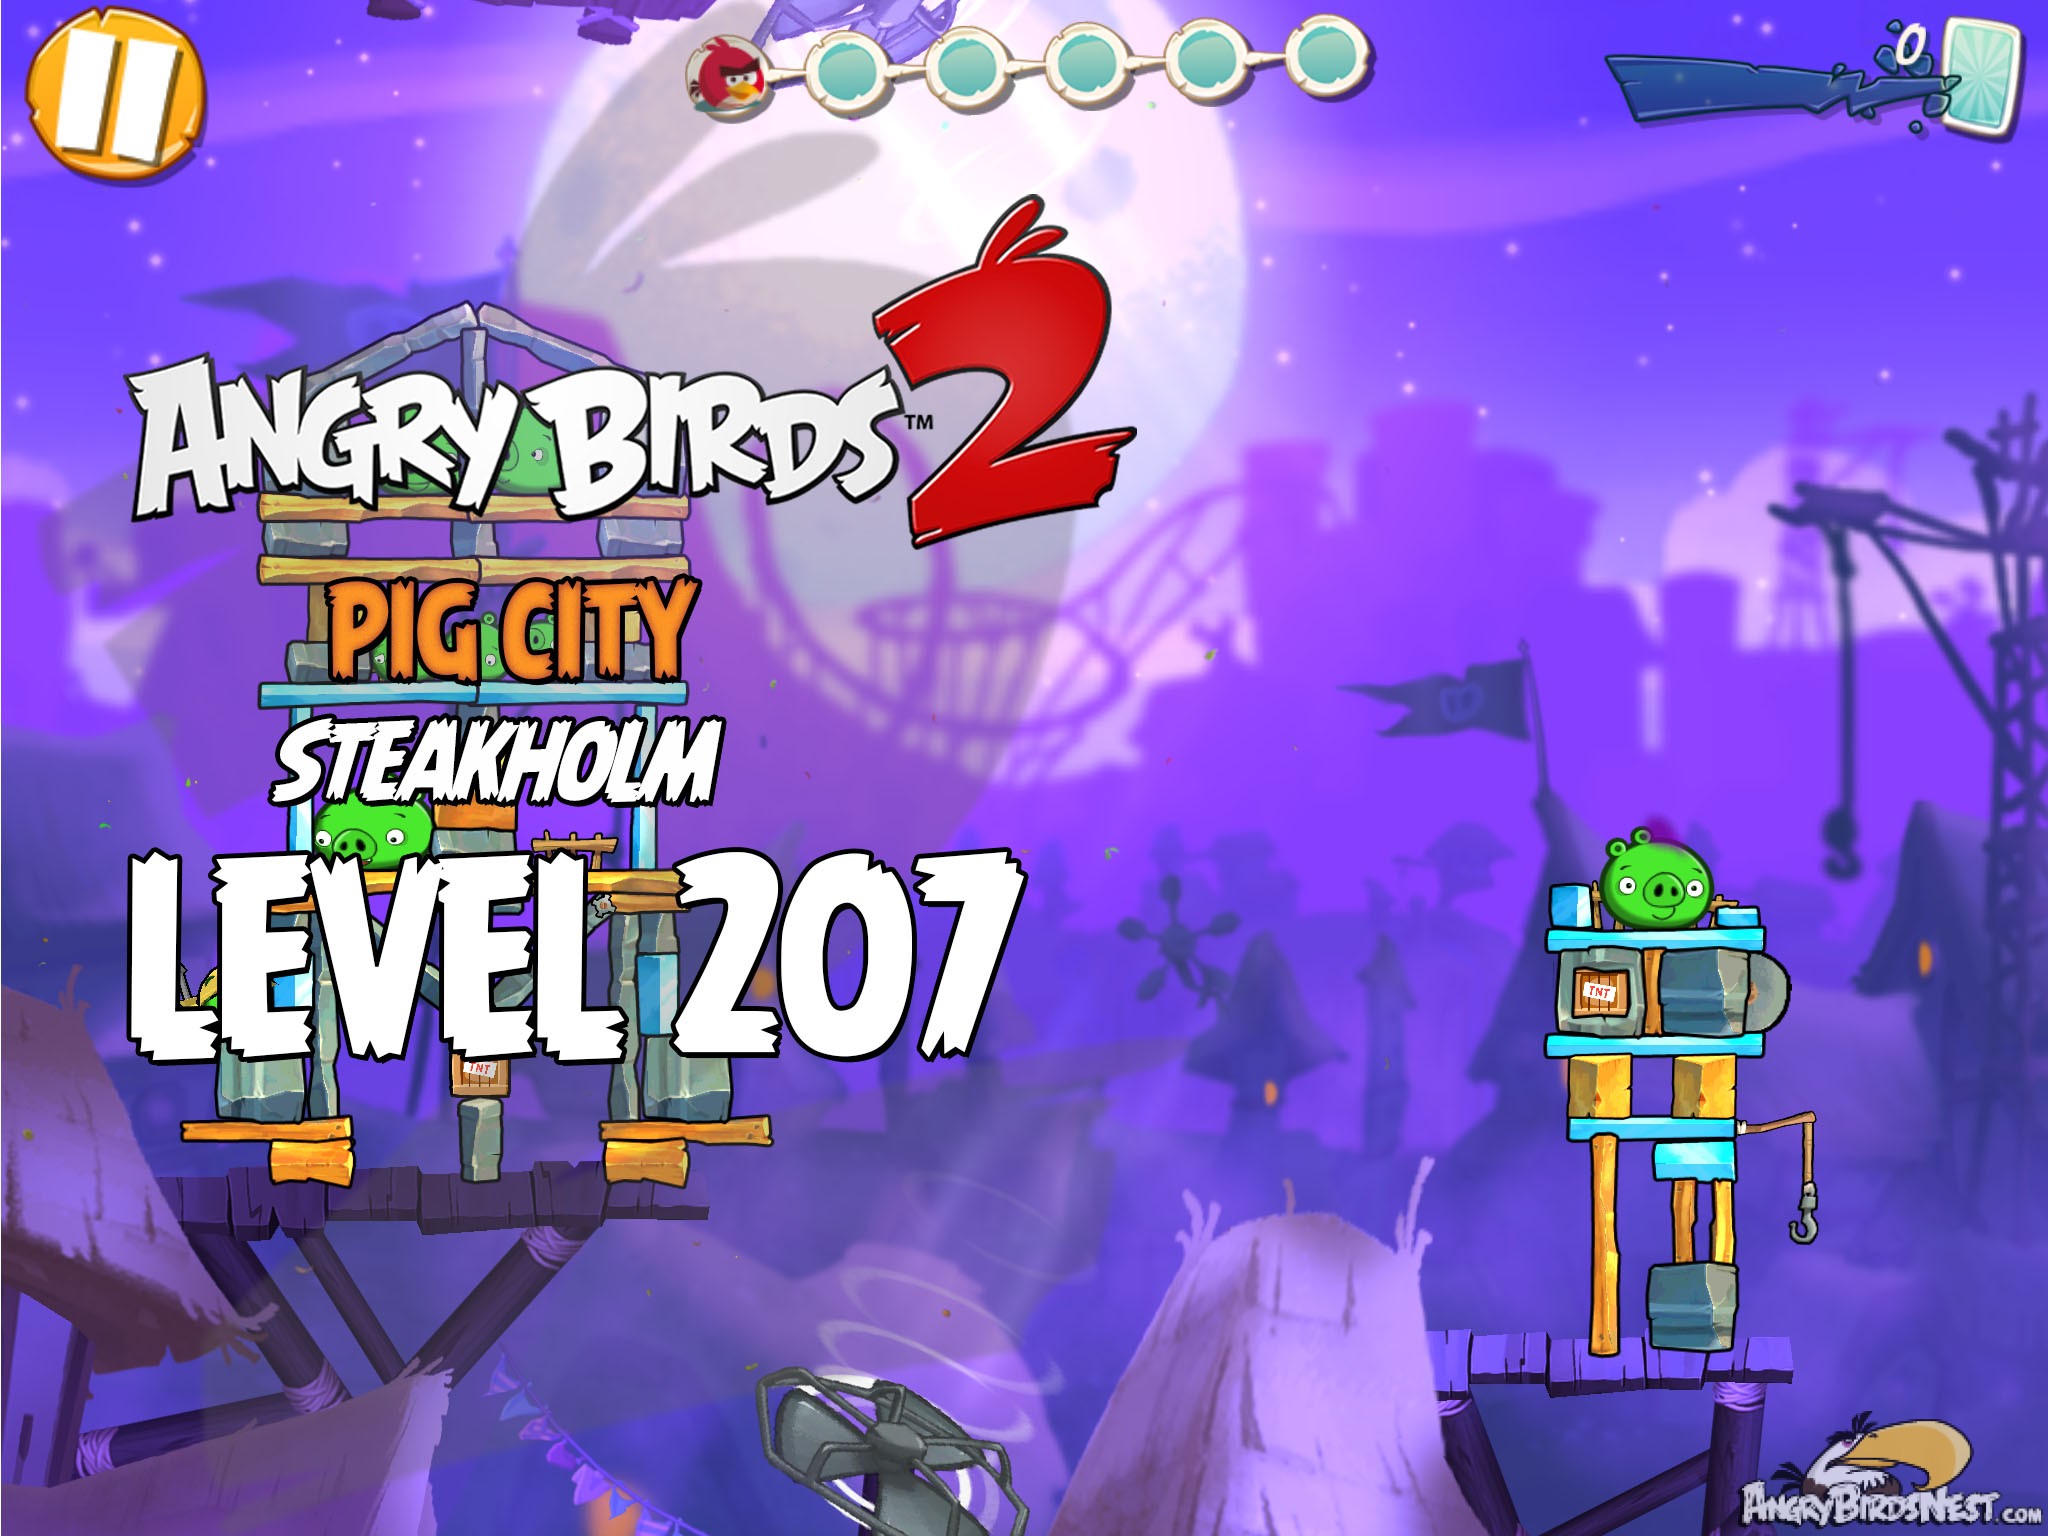 Angry Birds 2 Pig City Steakholm Level 207